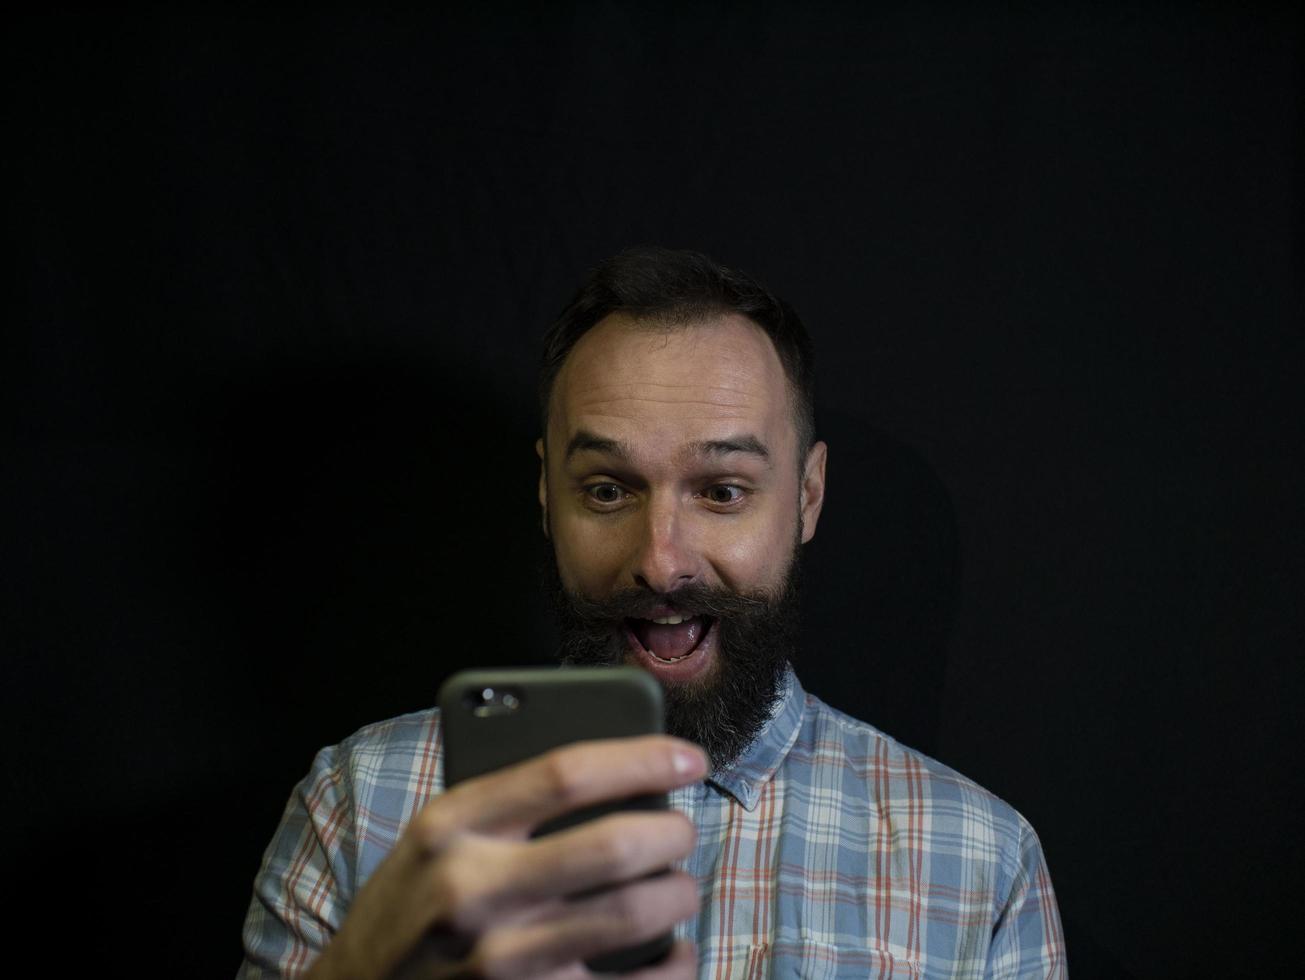 man with a beard  looks into a mobile phone photo